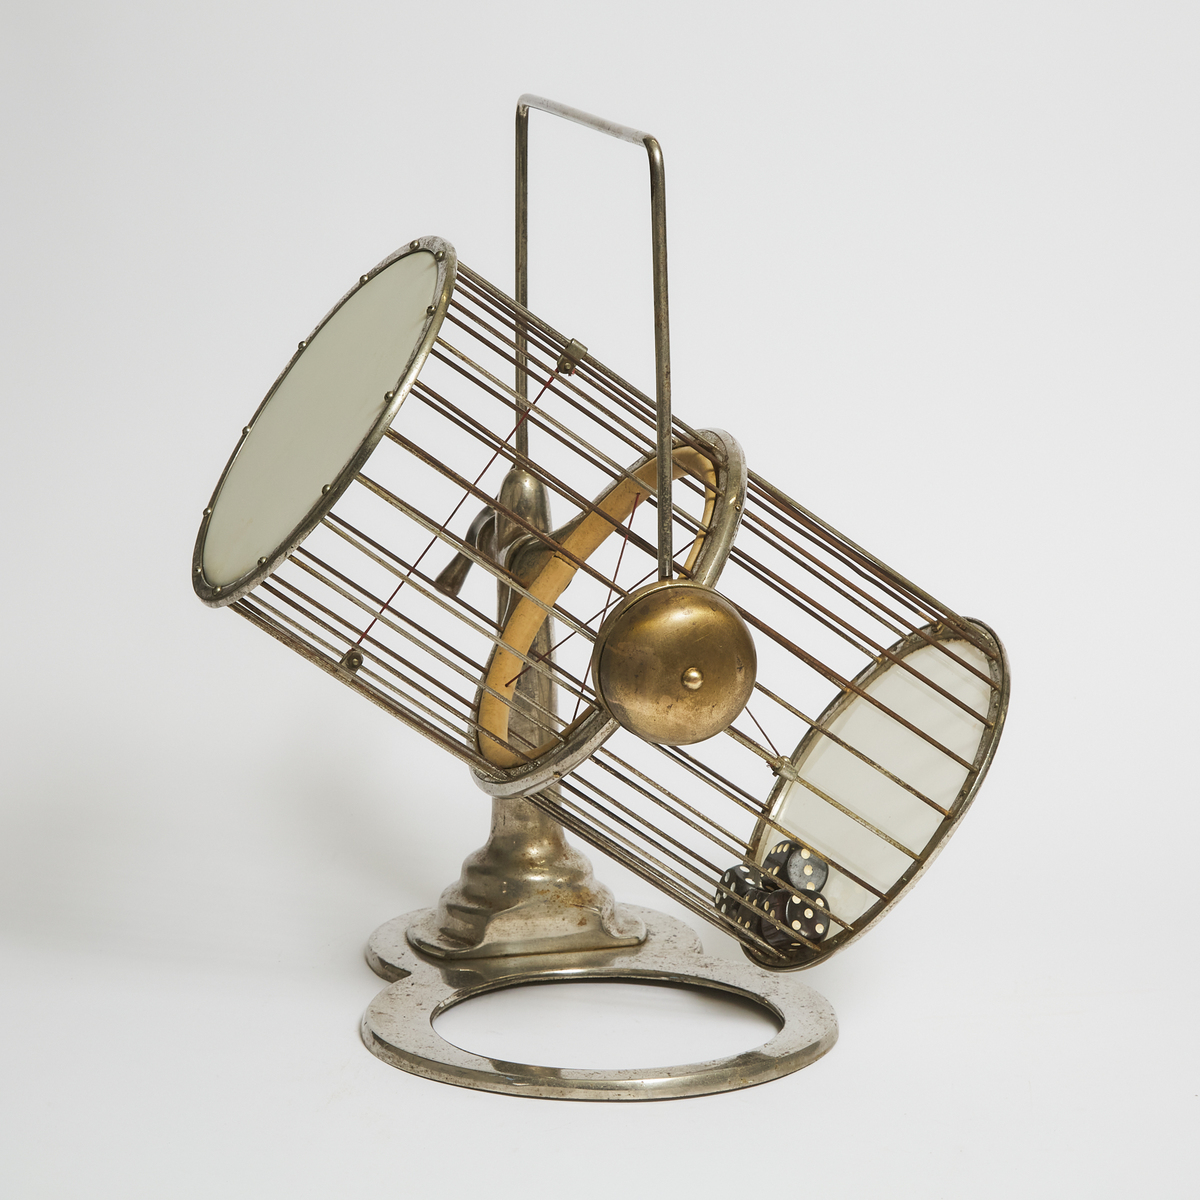 Carnival Gaming Dice Cage, c.1930, height 21 in — 53.3 cm - Image 2 of 2